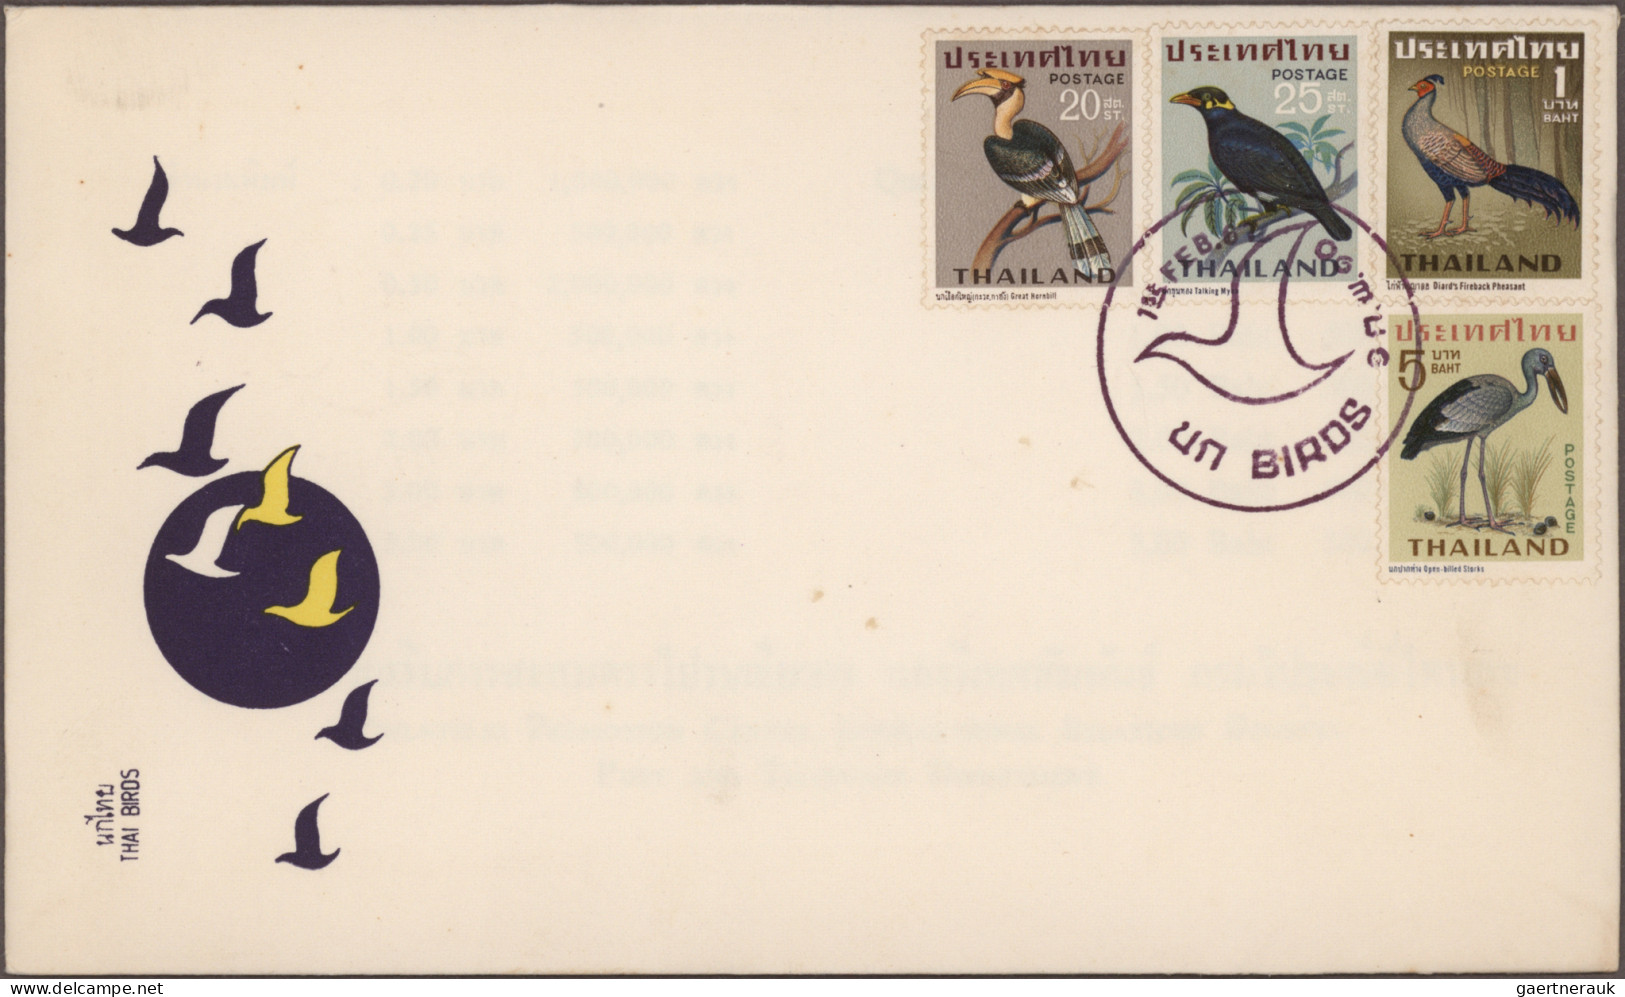 Thailand: 1940's-1990's: More than 100 covers, postcards and FDC's, with a few e